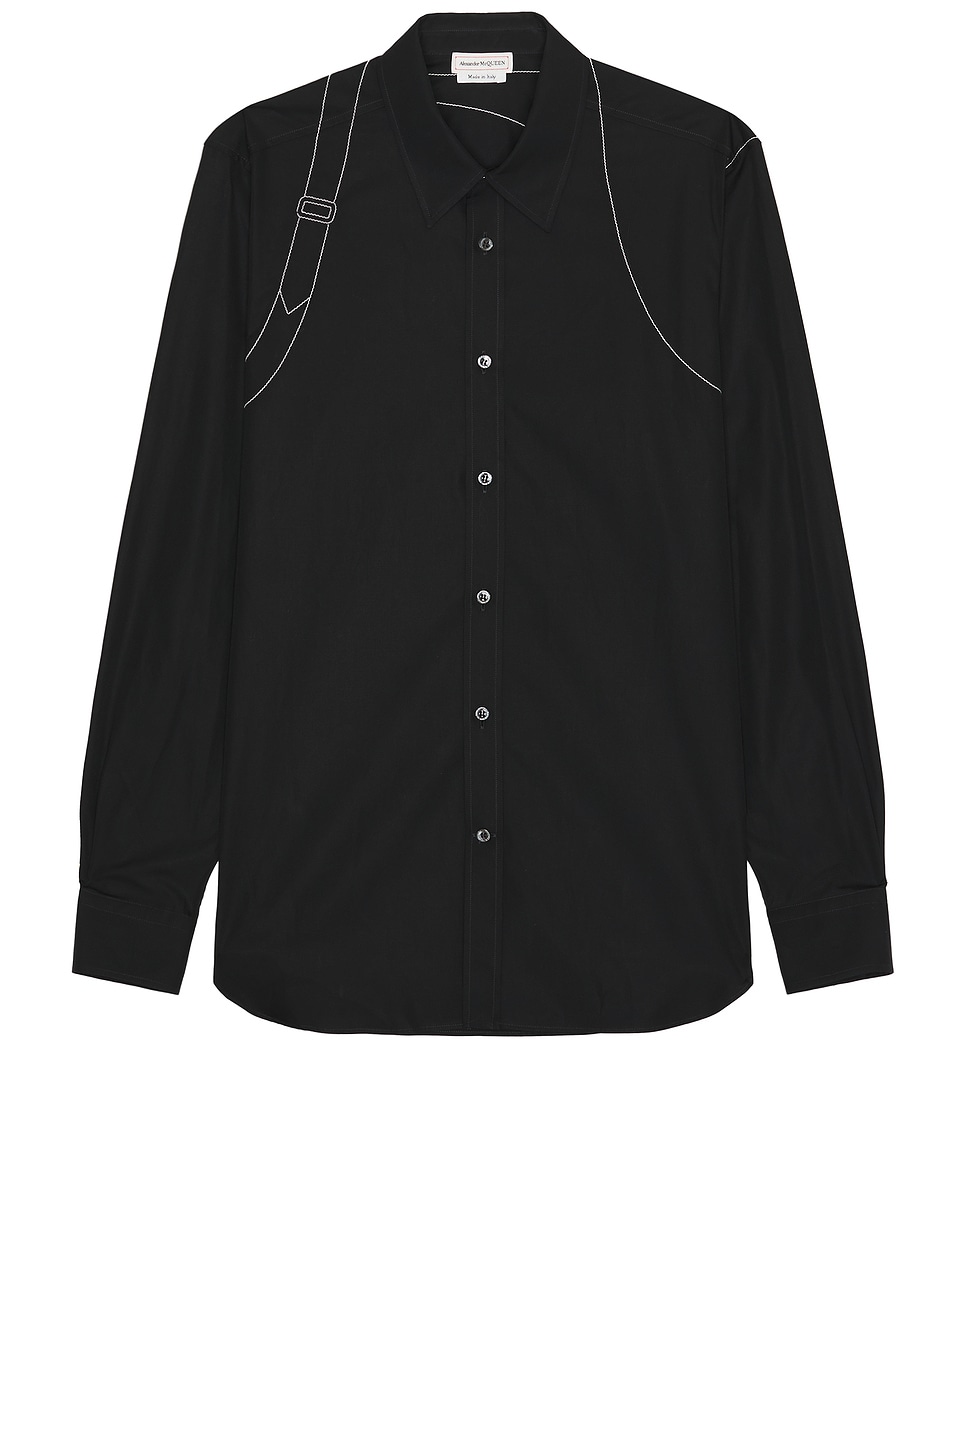 Image 1 of Alexander McQueen Stitching Harness Long Sleeve Shirt in Black